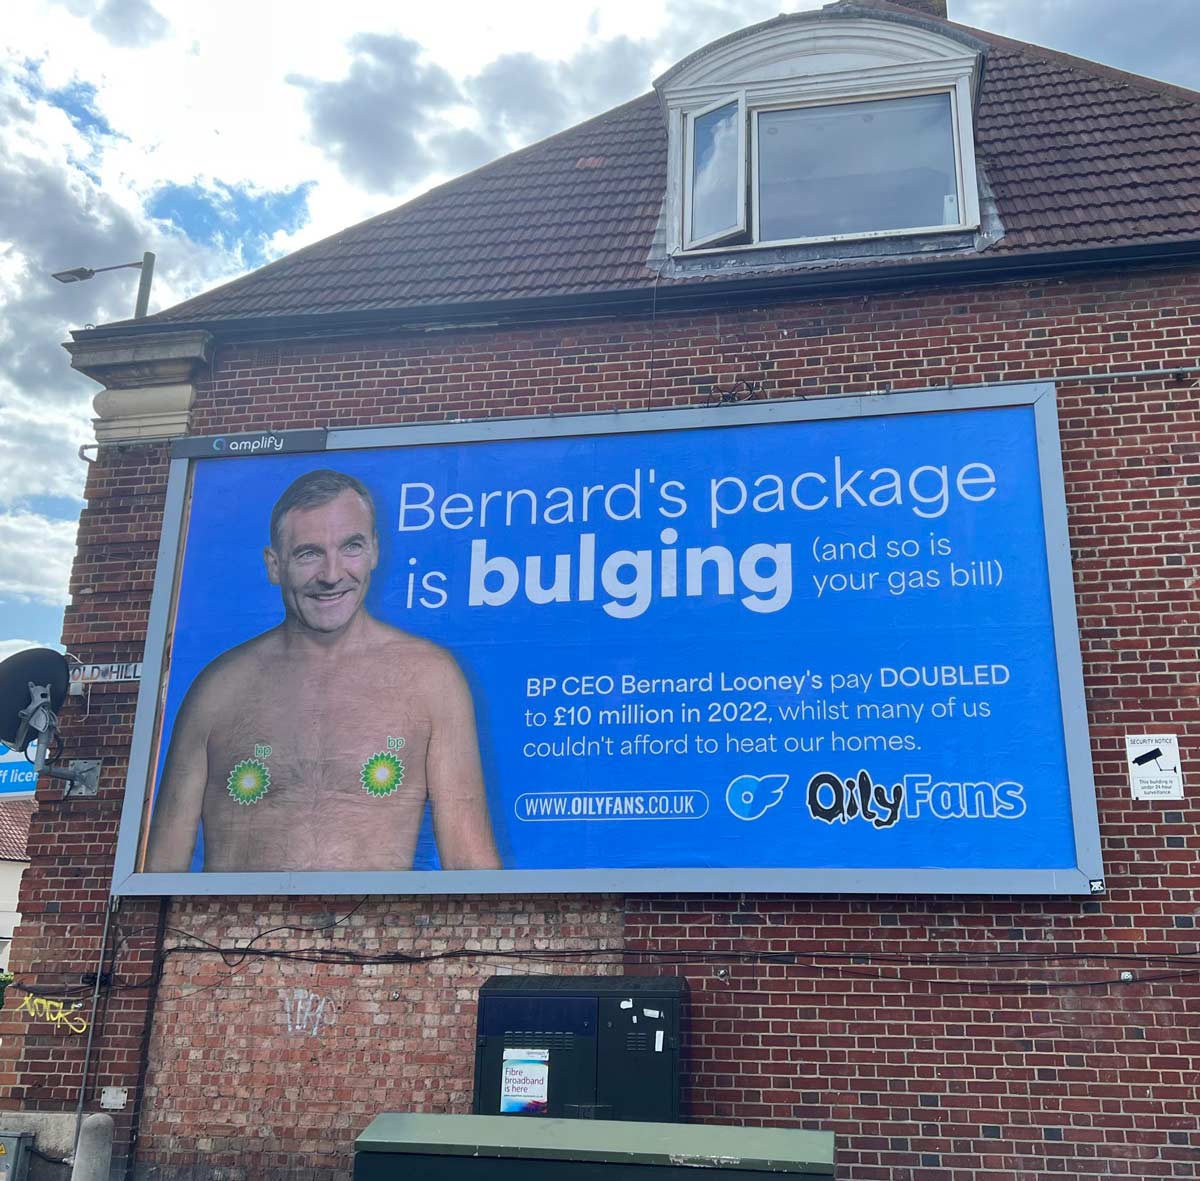 ‘OilyFans’ billboards show BP chief executive topless after earning millions